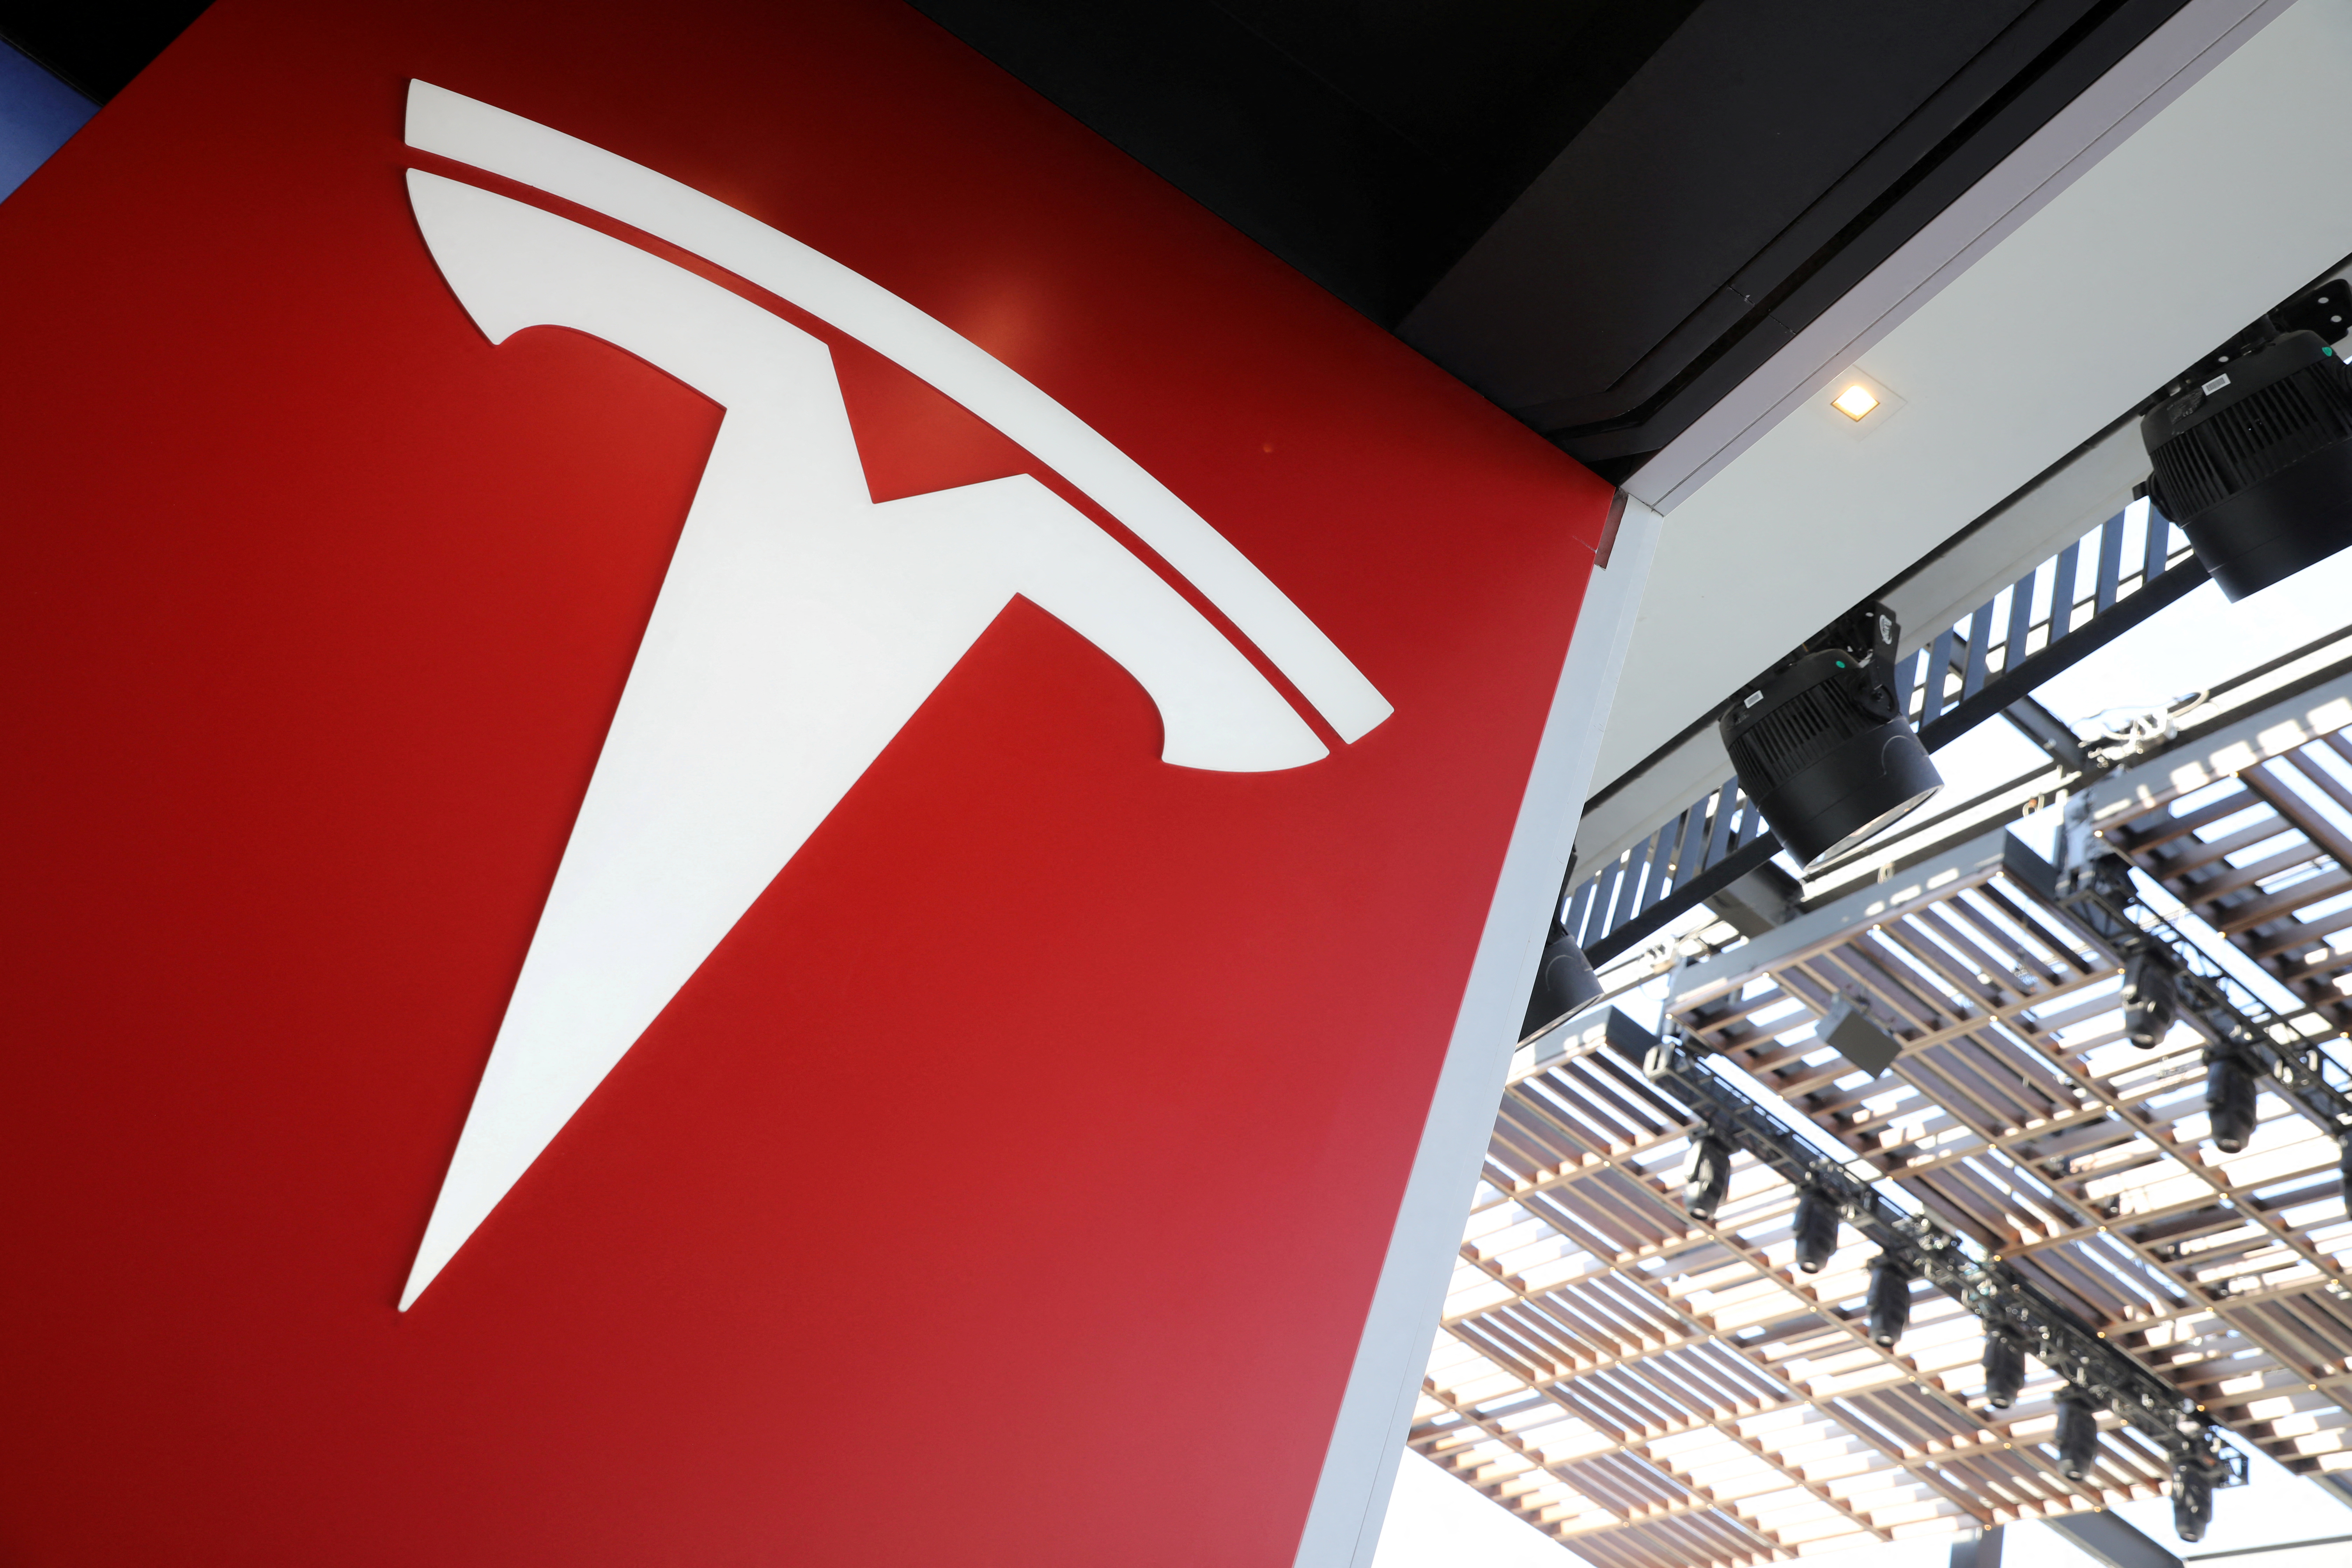 Tesla Sued by Former Employees Over ‘Mass Layoff’